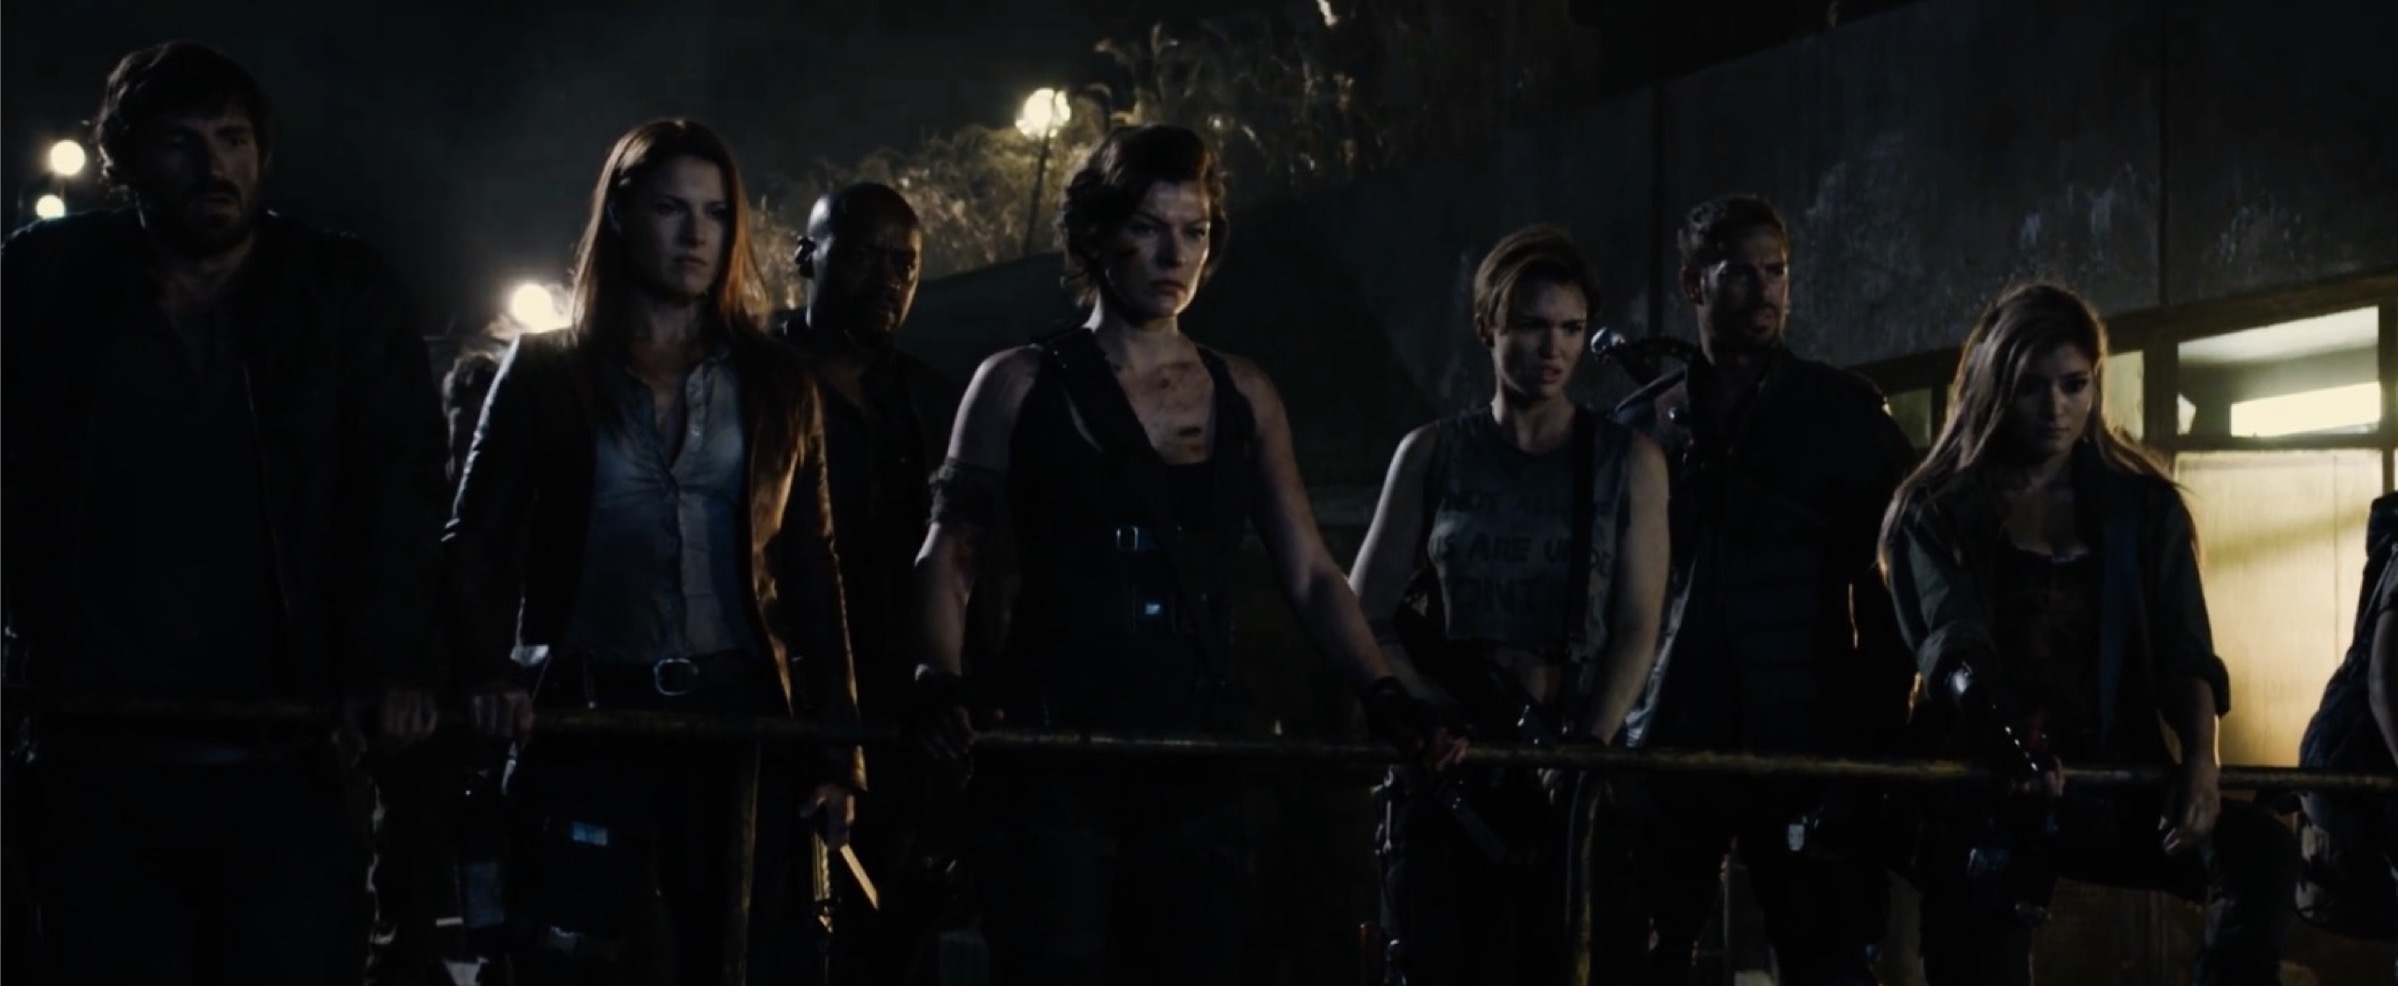 Resident Evil: The Final Chapter' Brings Back Dr. Isaacs and Albert Wesker!  - Bloody Disgusting